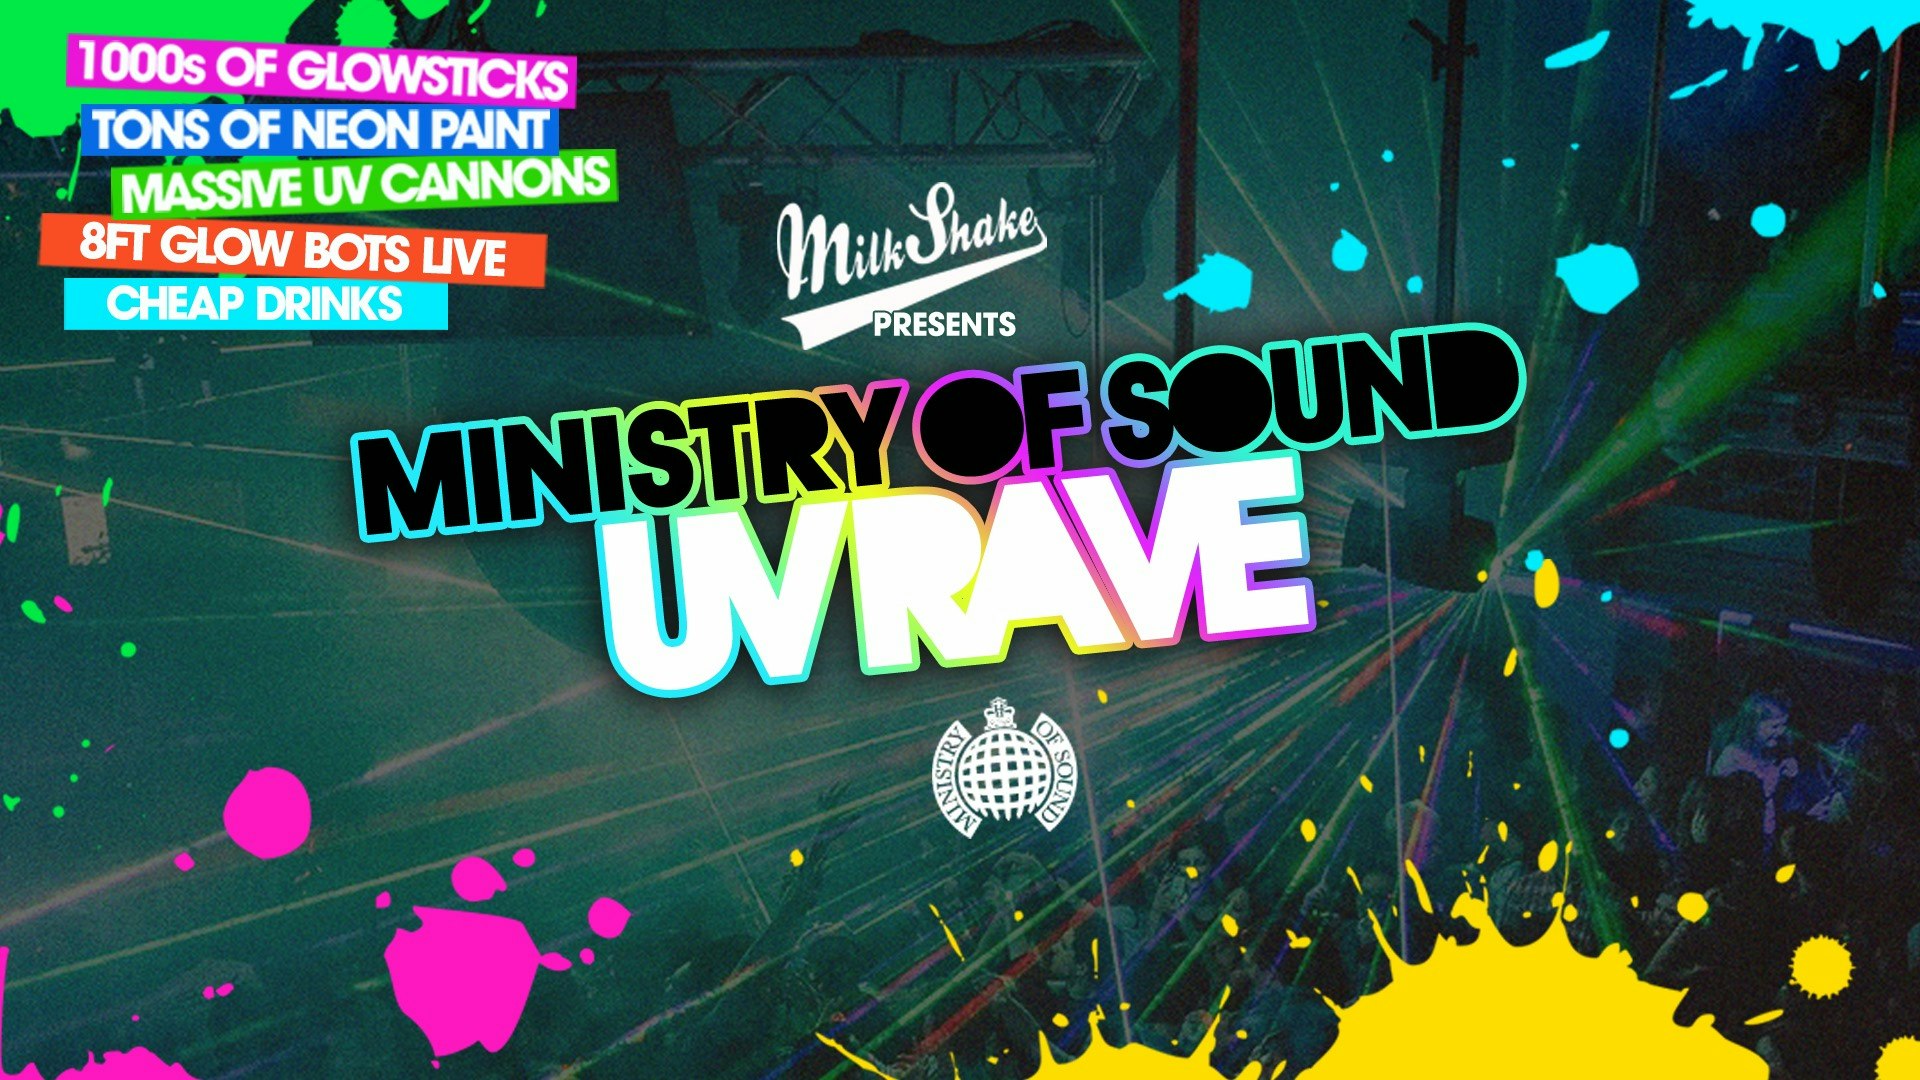 ⛔️ SOLD OUT ⛔️ The Milkshake, Ministry of Sound UV Rave ⚡ 2023 – 🔋 ⛔️ SOLD OUT ⛔️